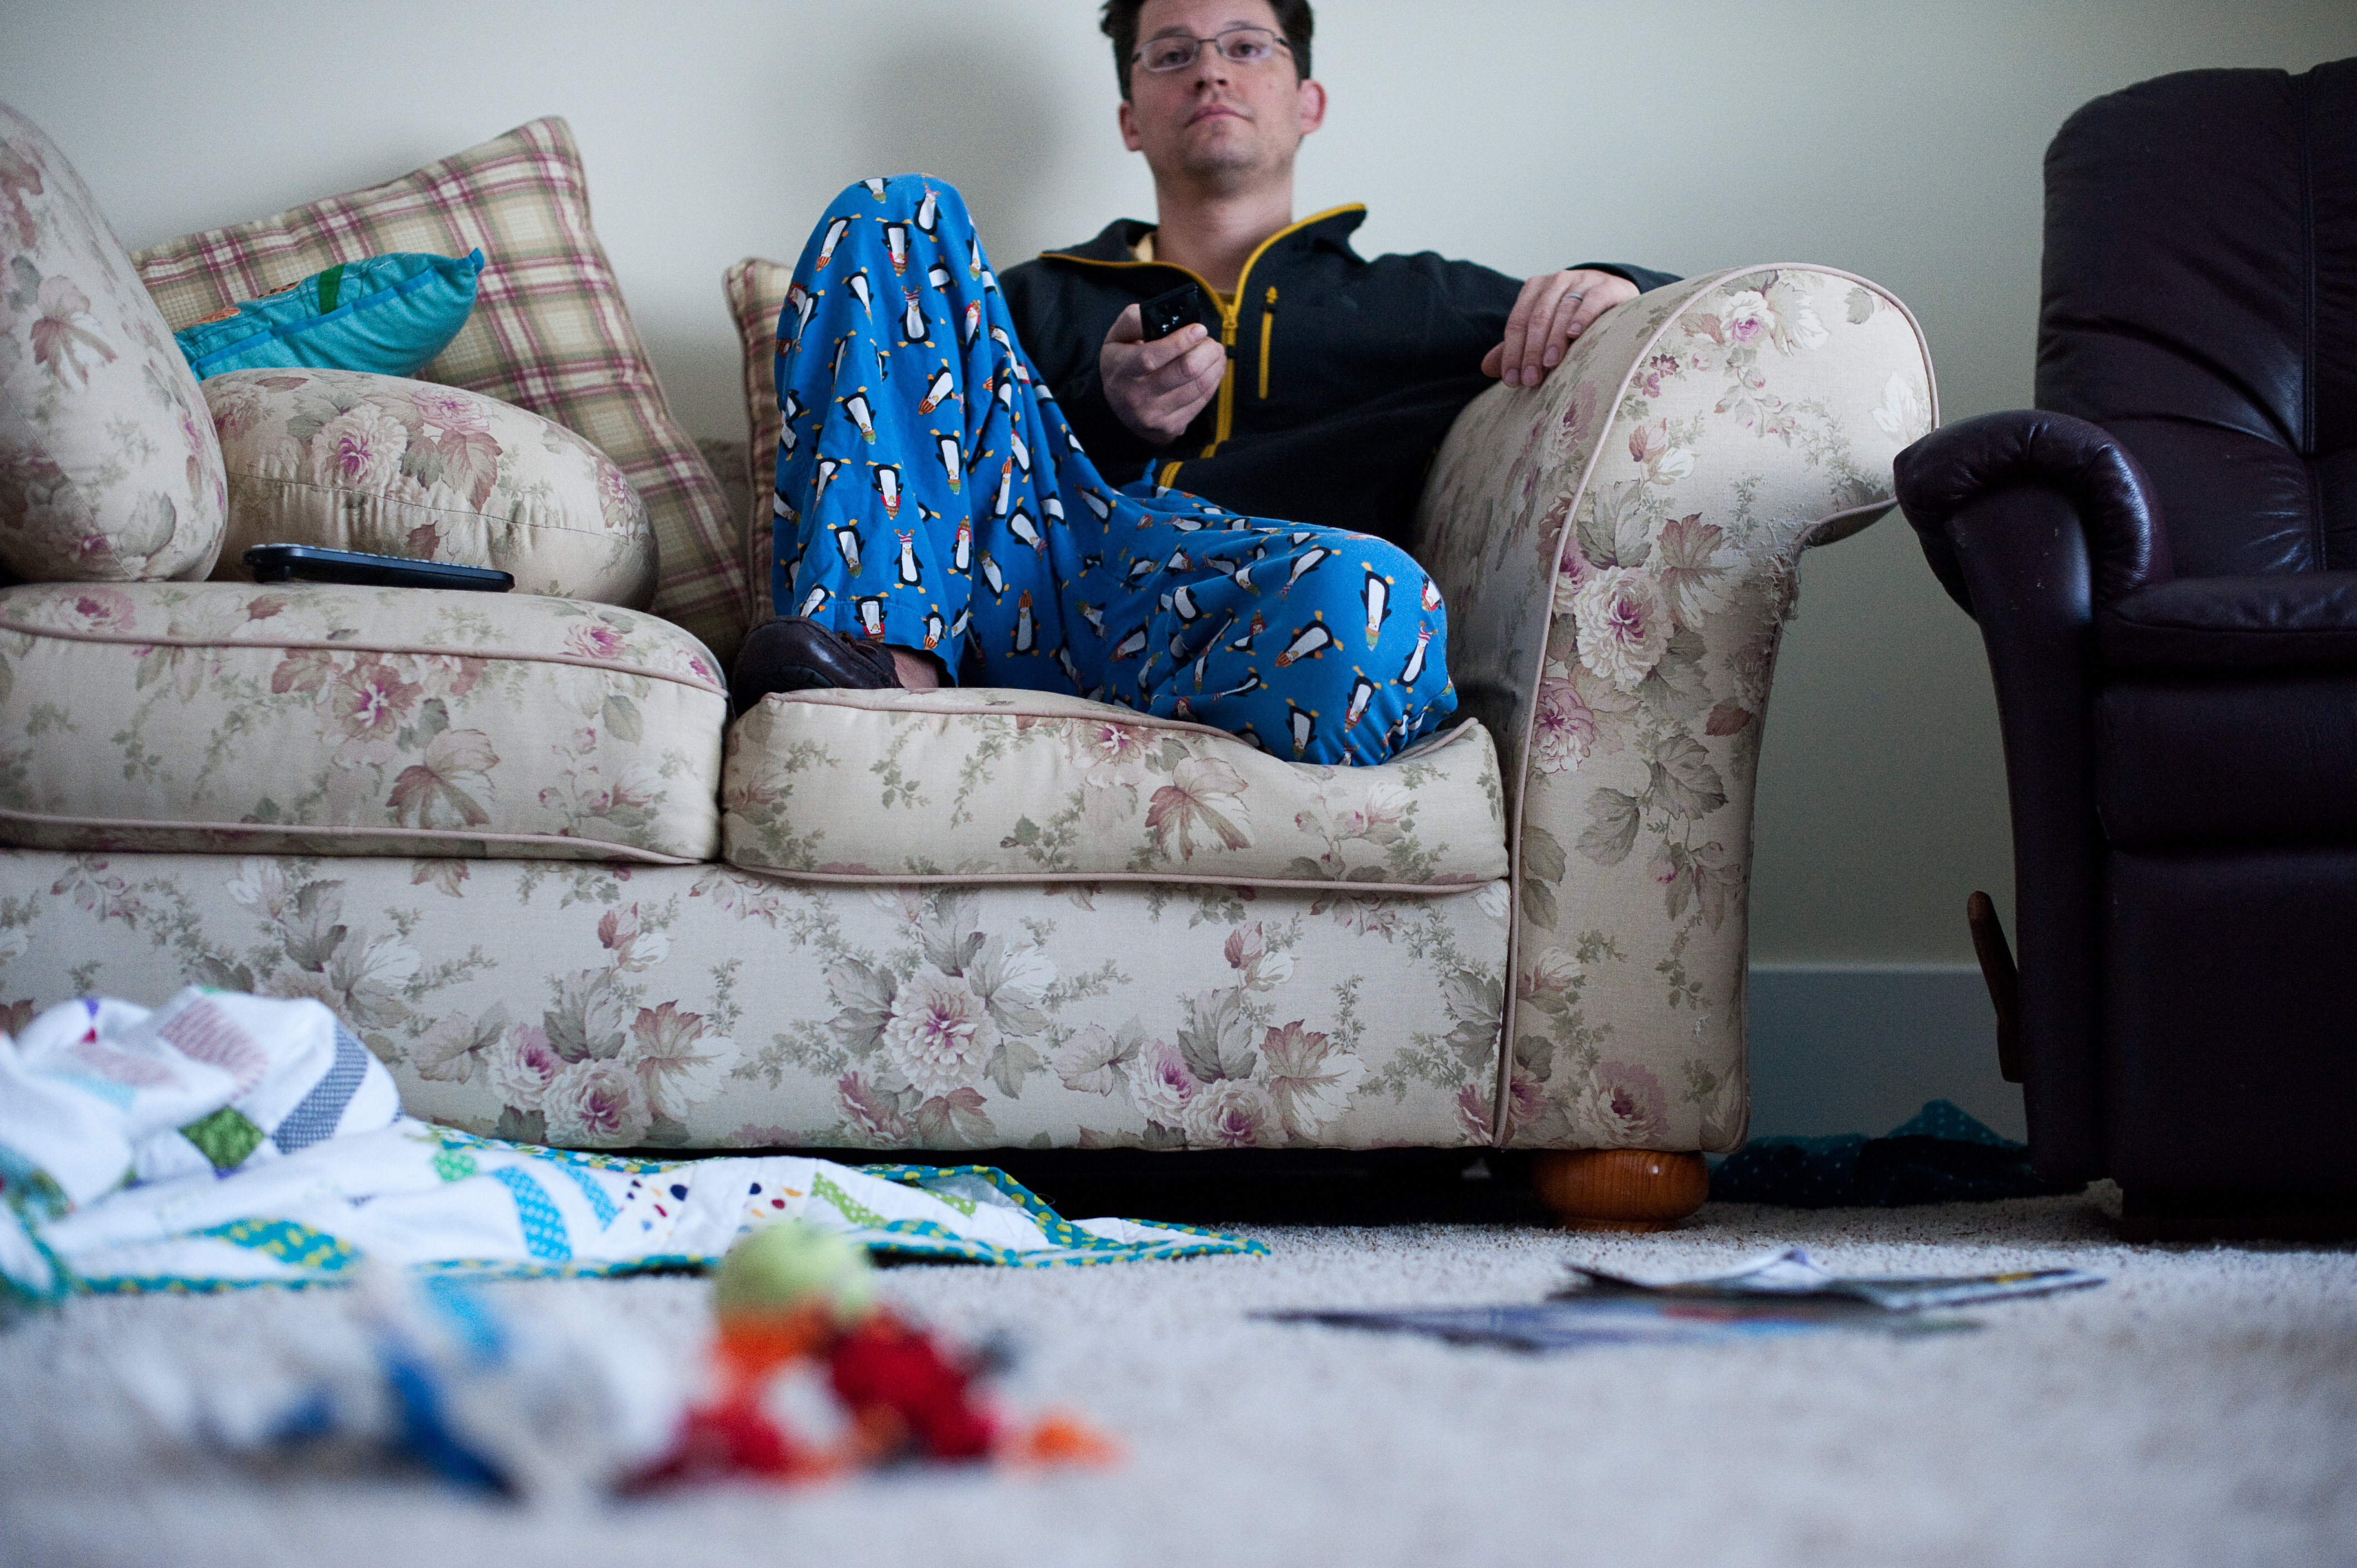 A lazy man sitting and watching television with a messy house | Source: Getty Images